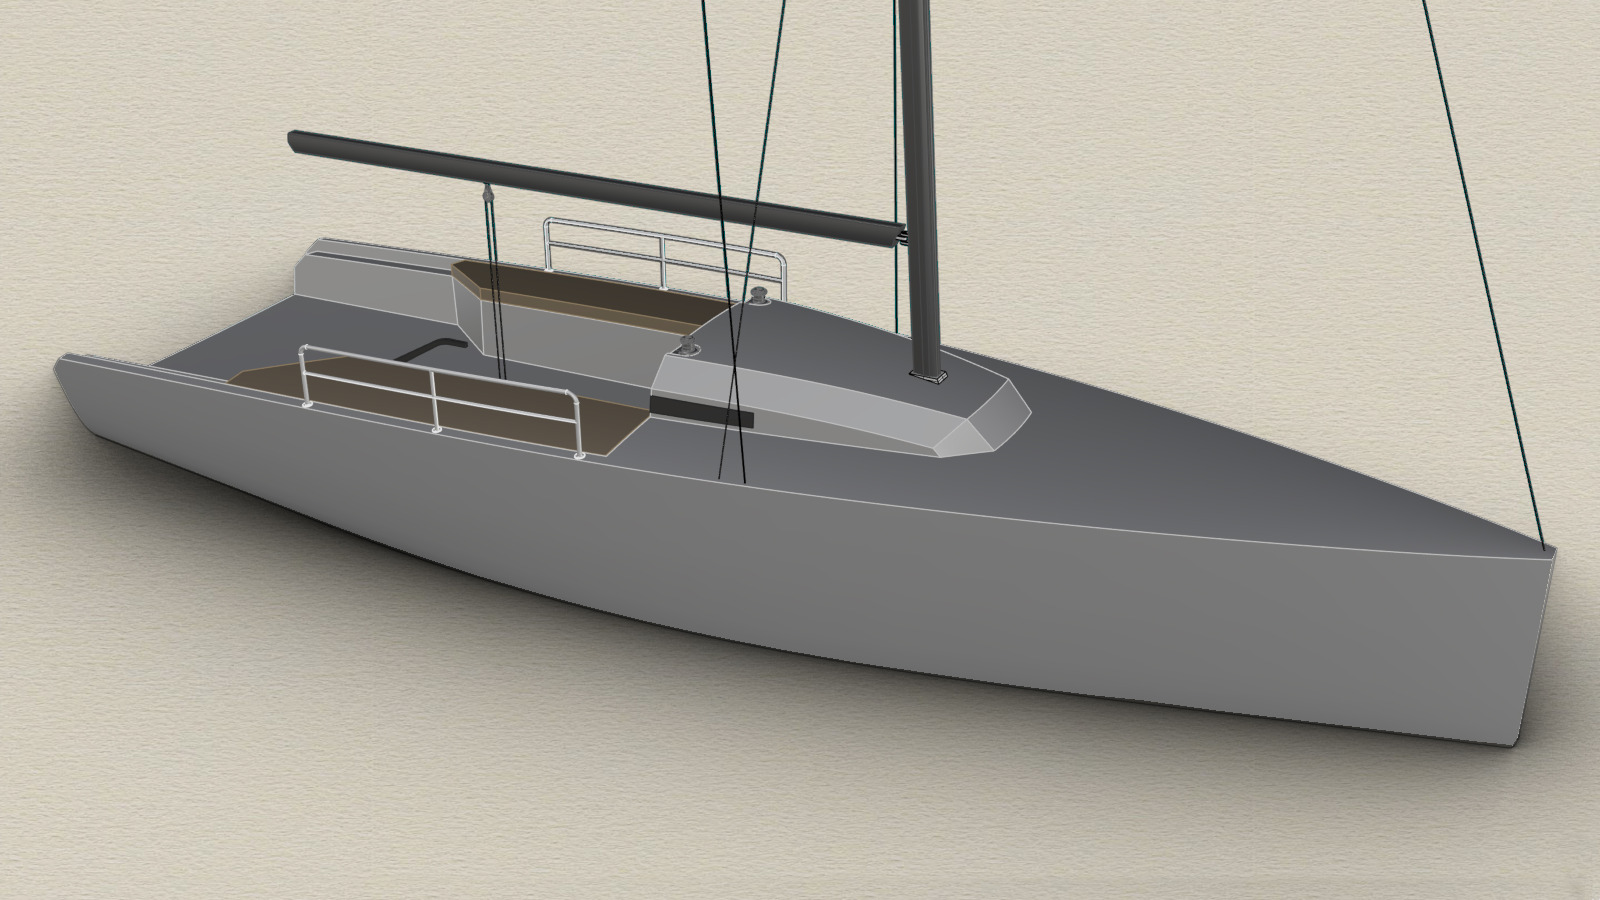 Naval 3D Modeling with Rhino. Level 1